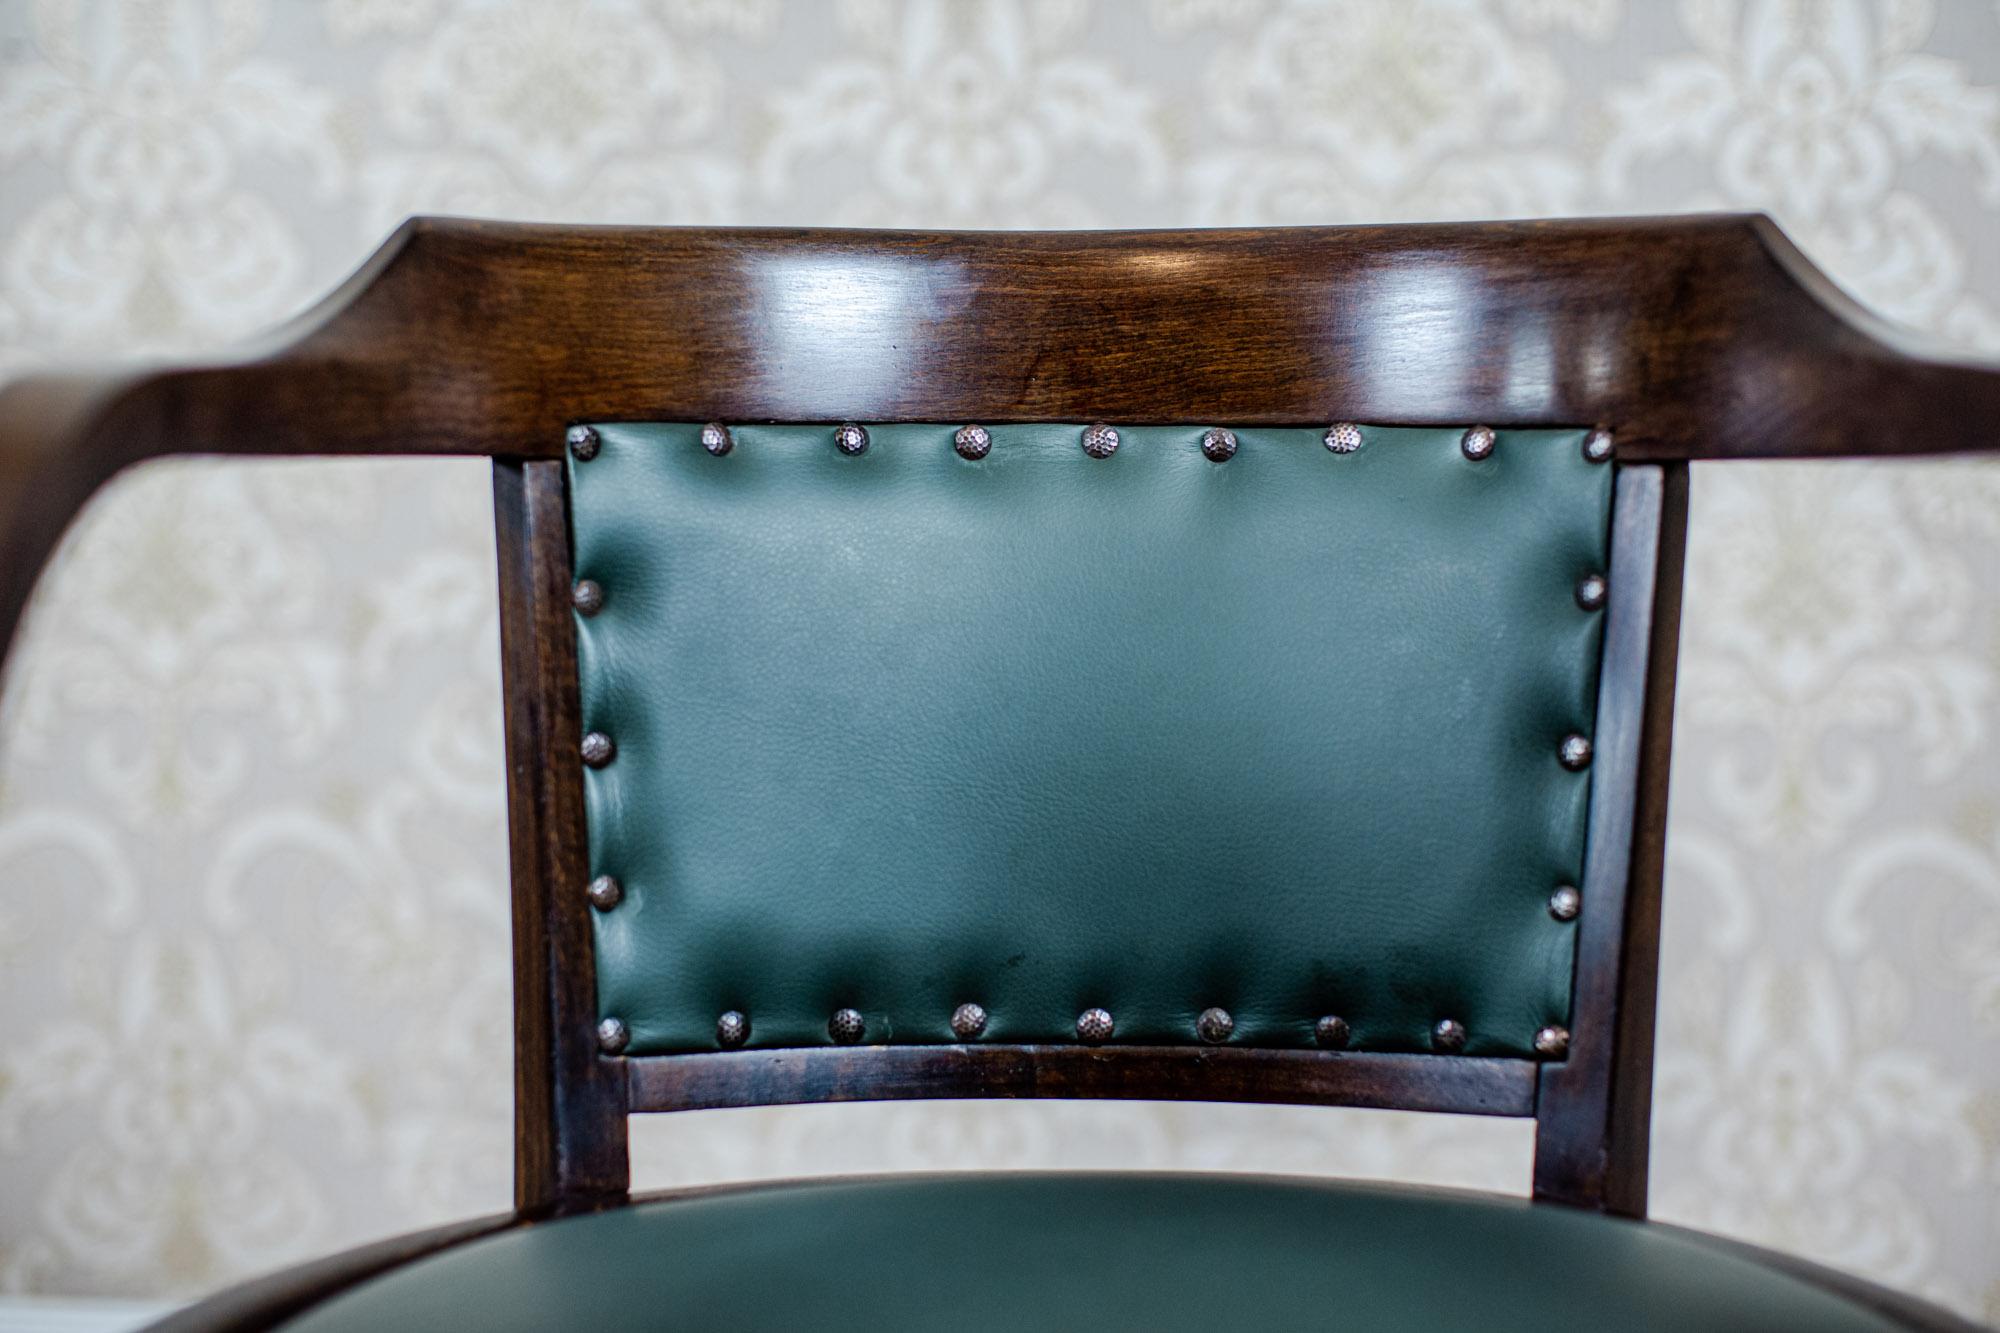 Brass Beech Office Chair From the Interwar Period Upholstered with Green Leather